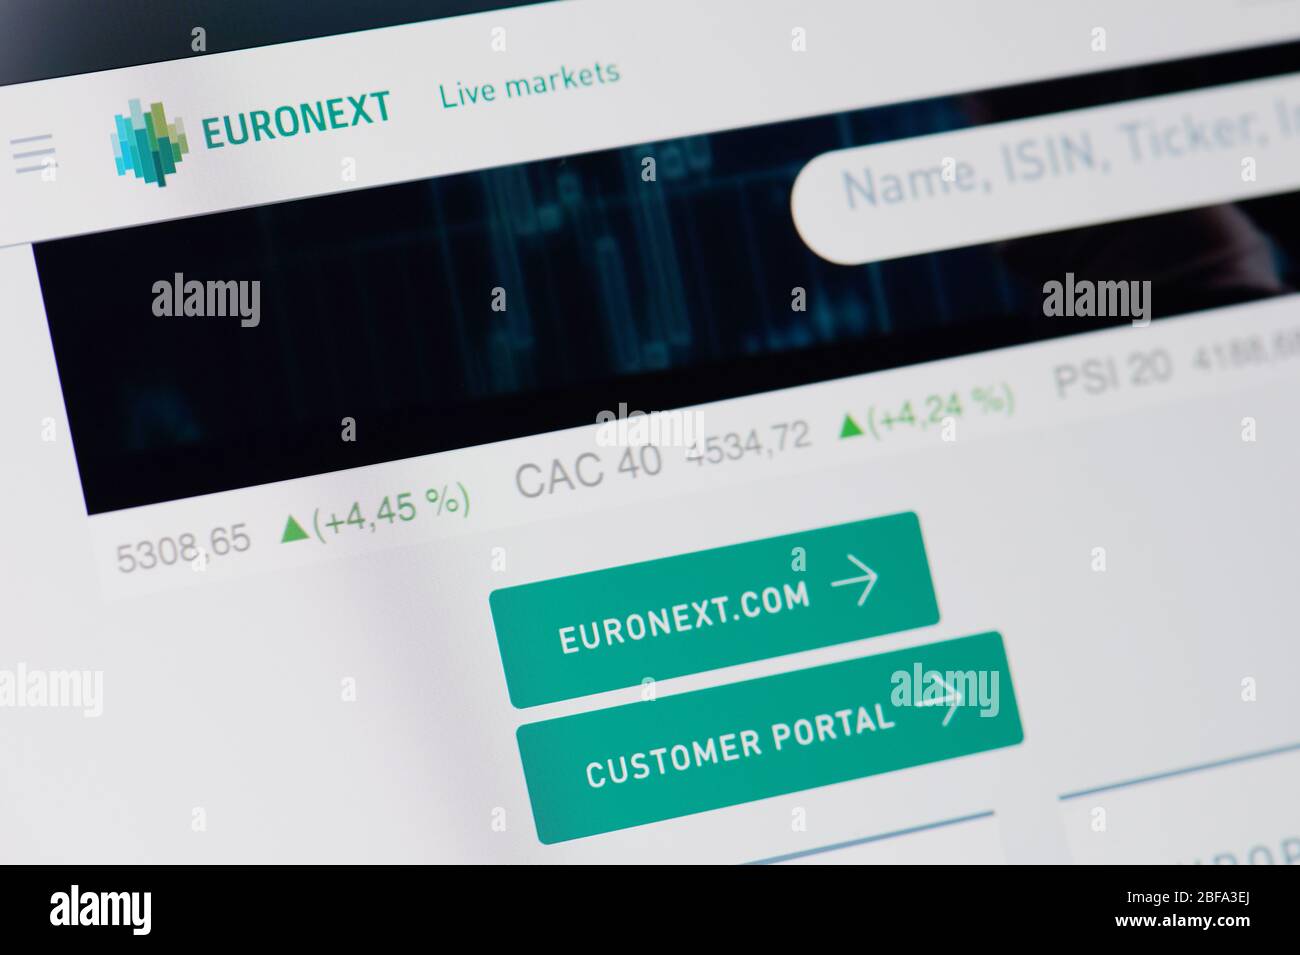 New-York , USA - April 17 , 2020: Using Live markets in Euronext close up view on computer screen Stock Photo